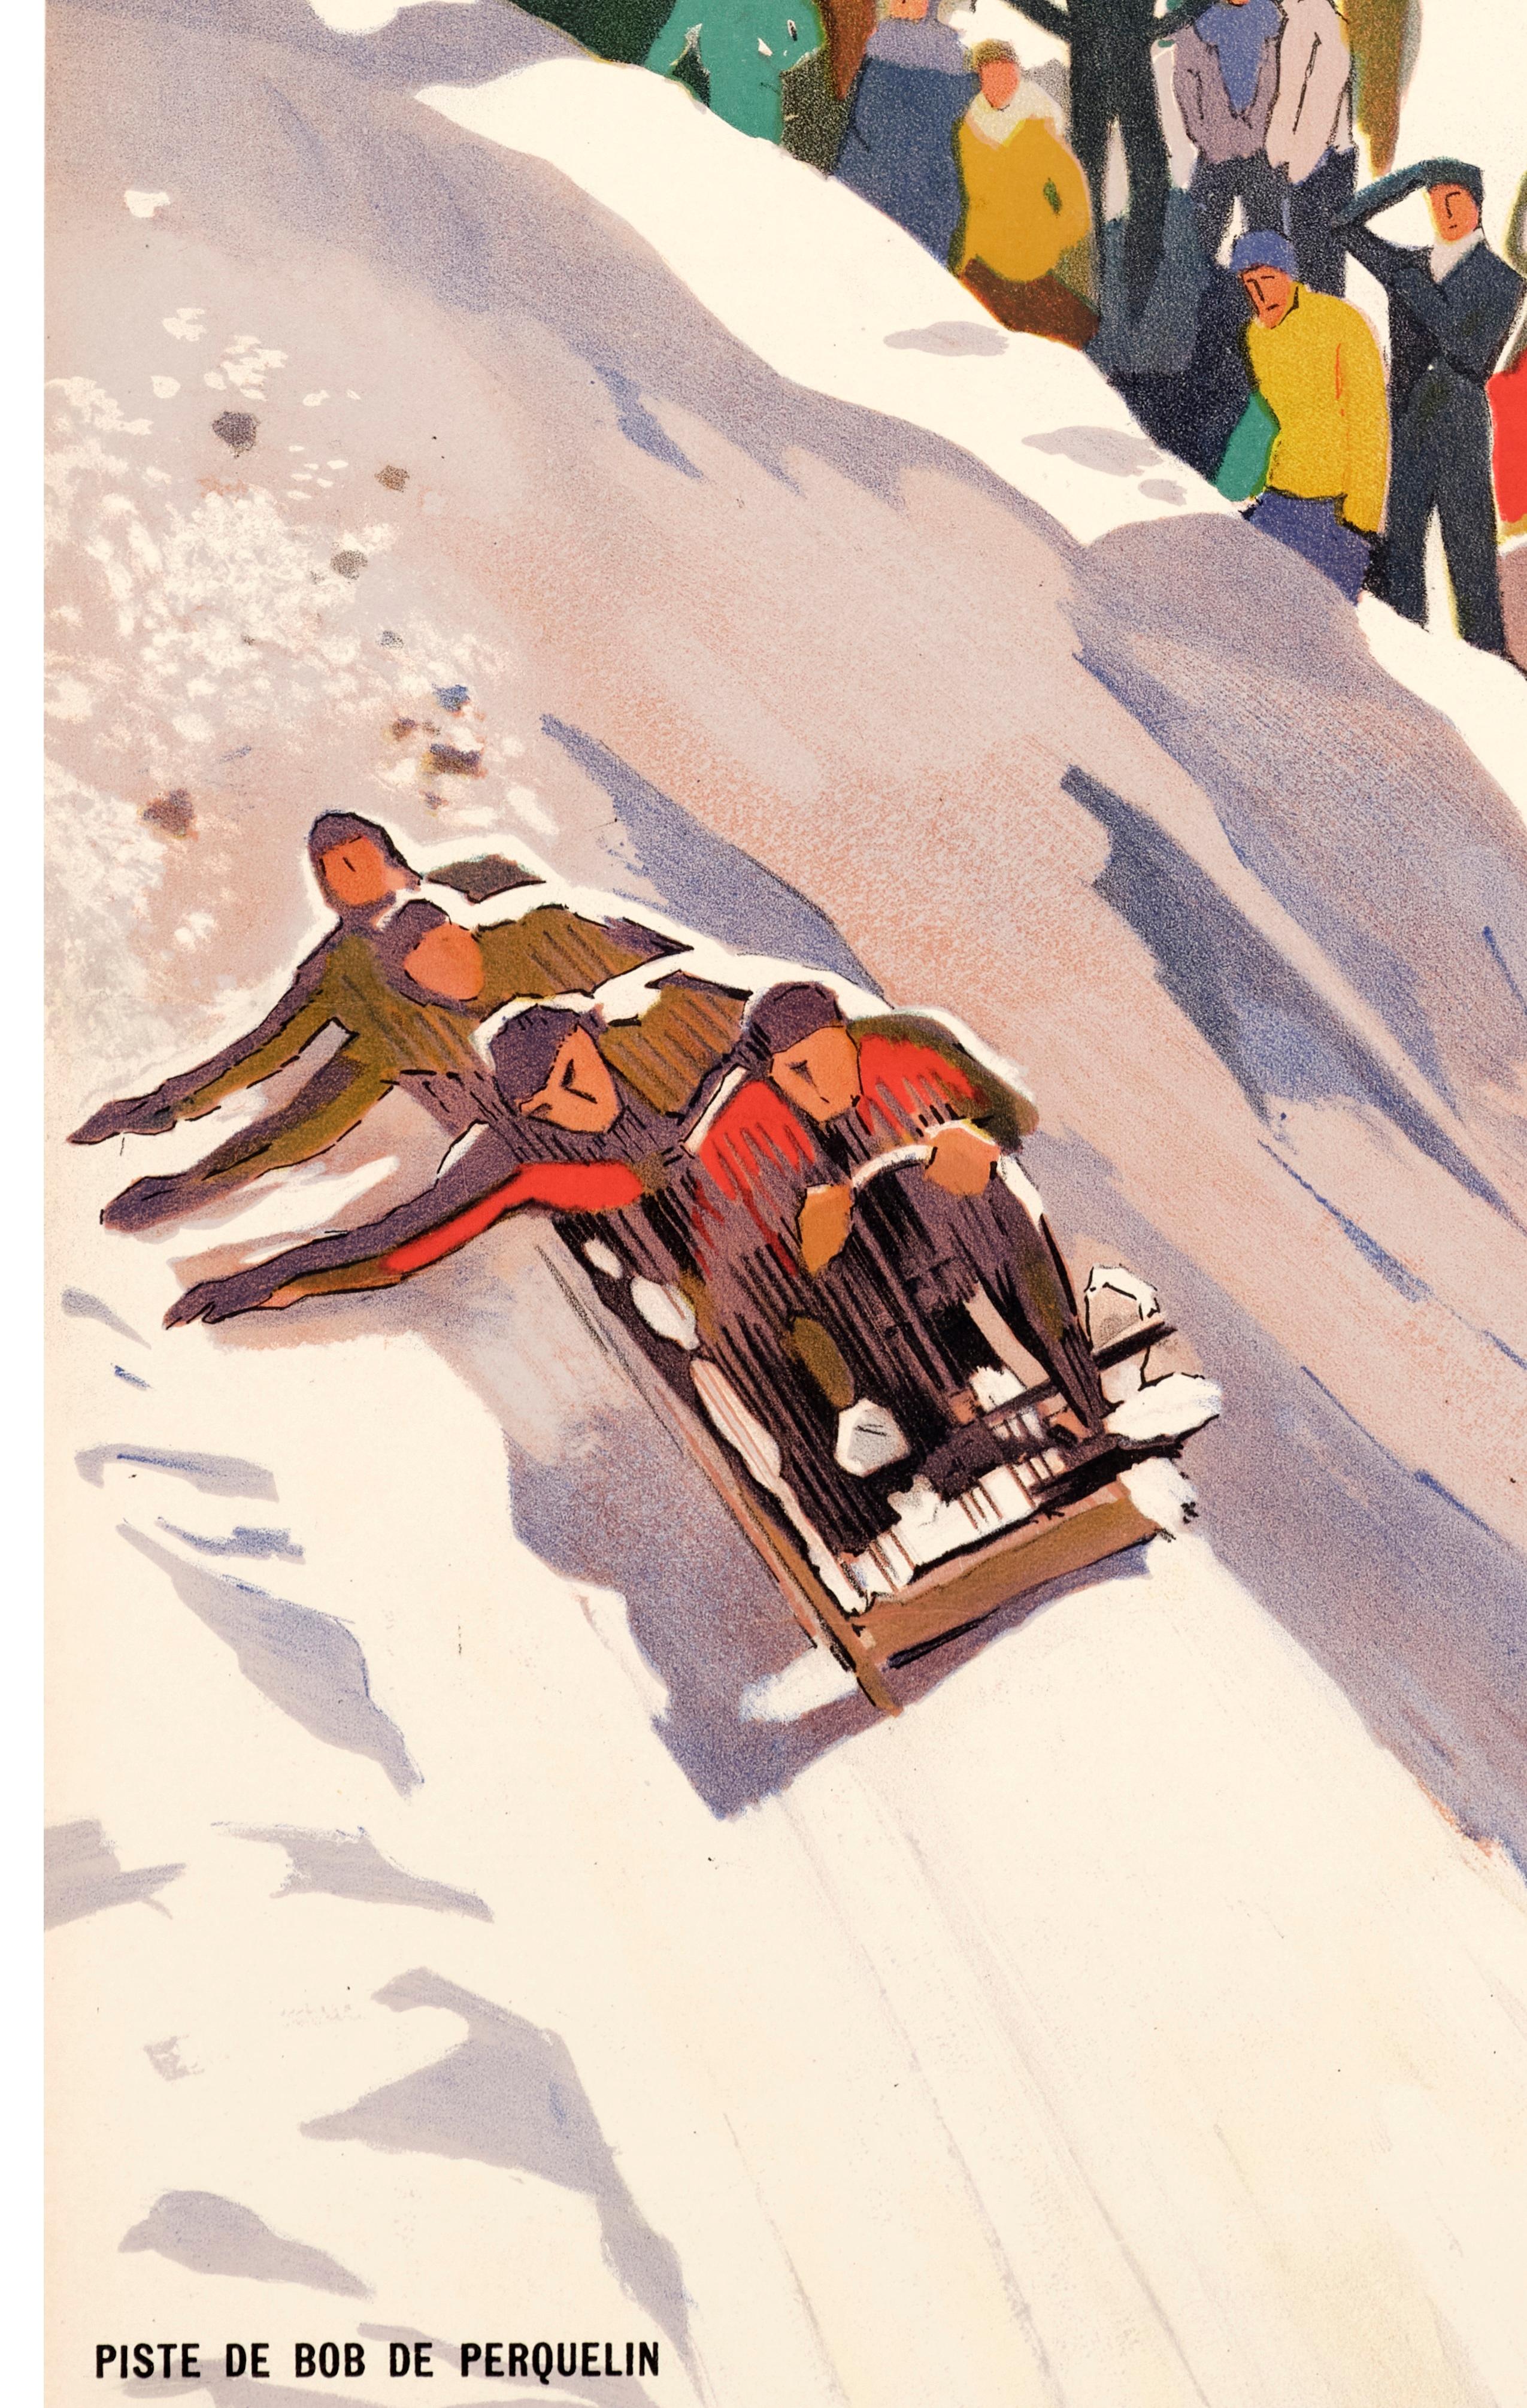 Broders, Original Art Deco Poster, Winter Sports, Bobsleigh Skiing Art Deco 1930 For Sale 1